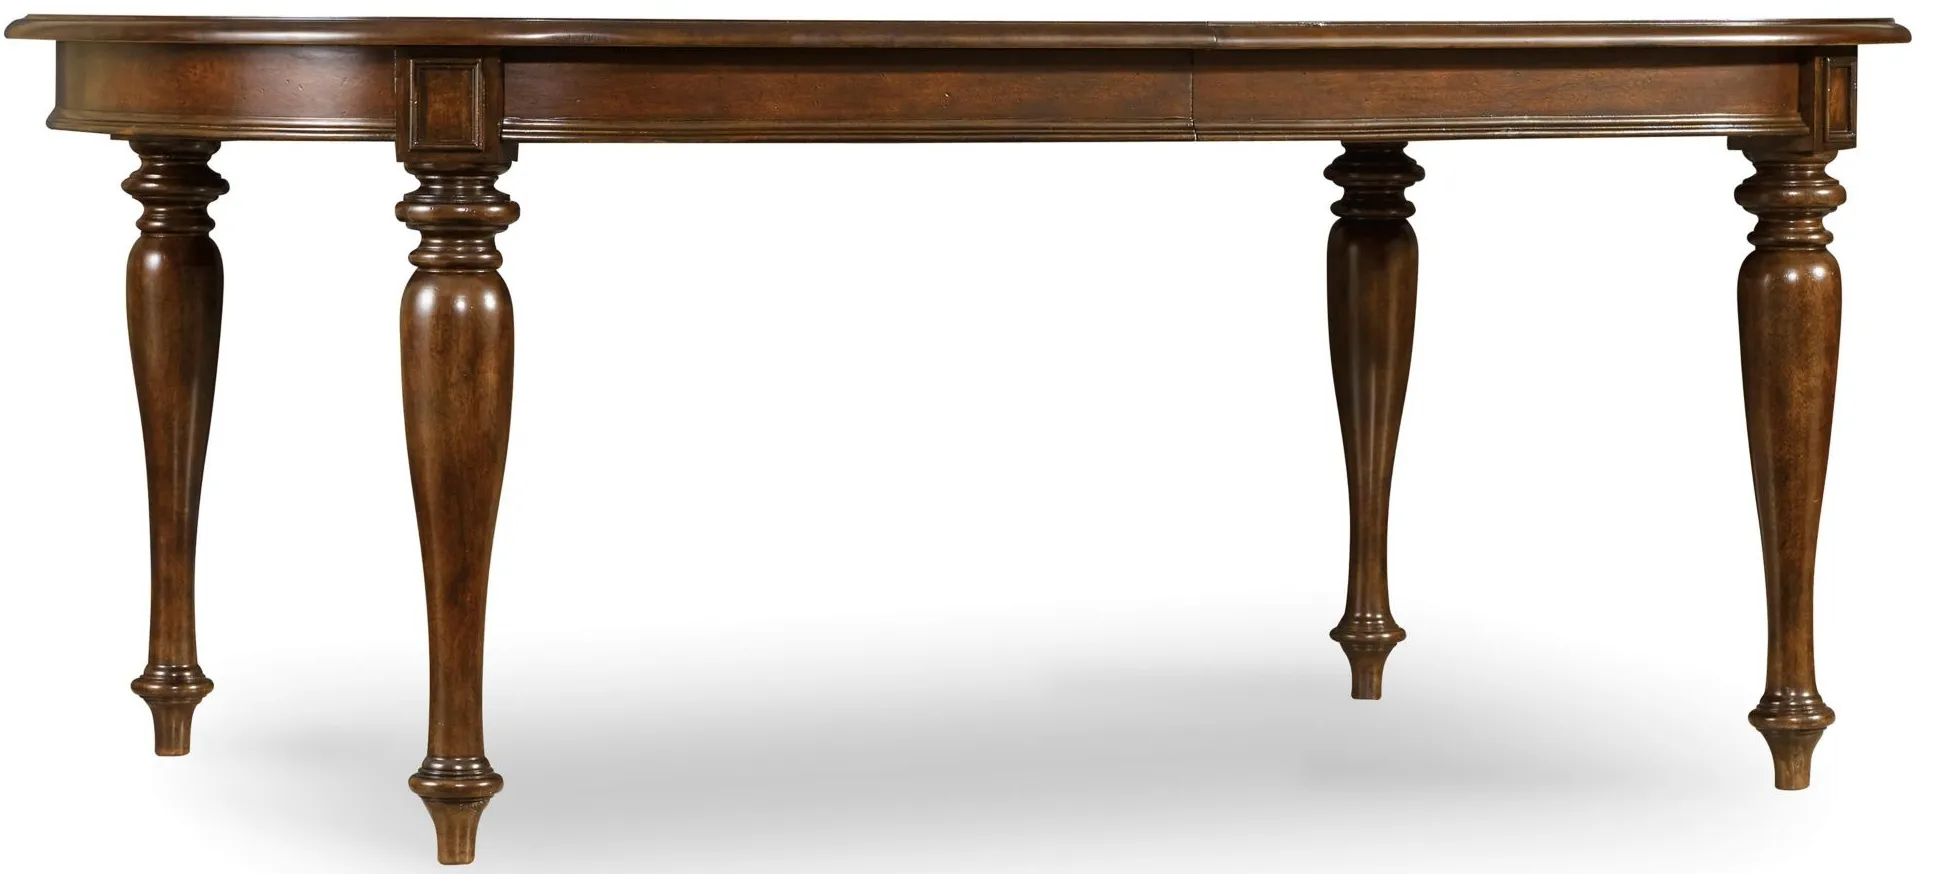 Leesburg Oval Dining Table with Two Leaves in Mahogany by Hooker Furniture